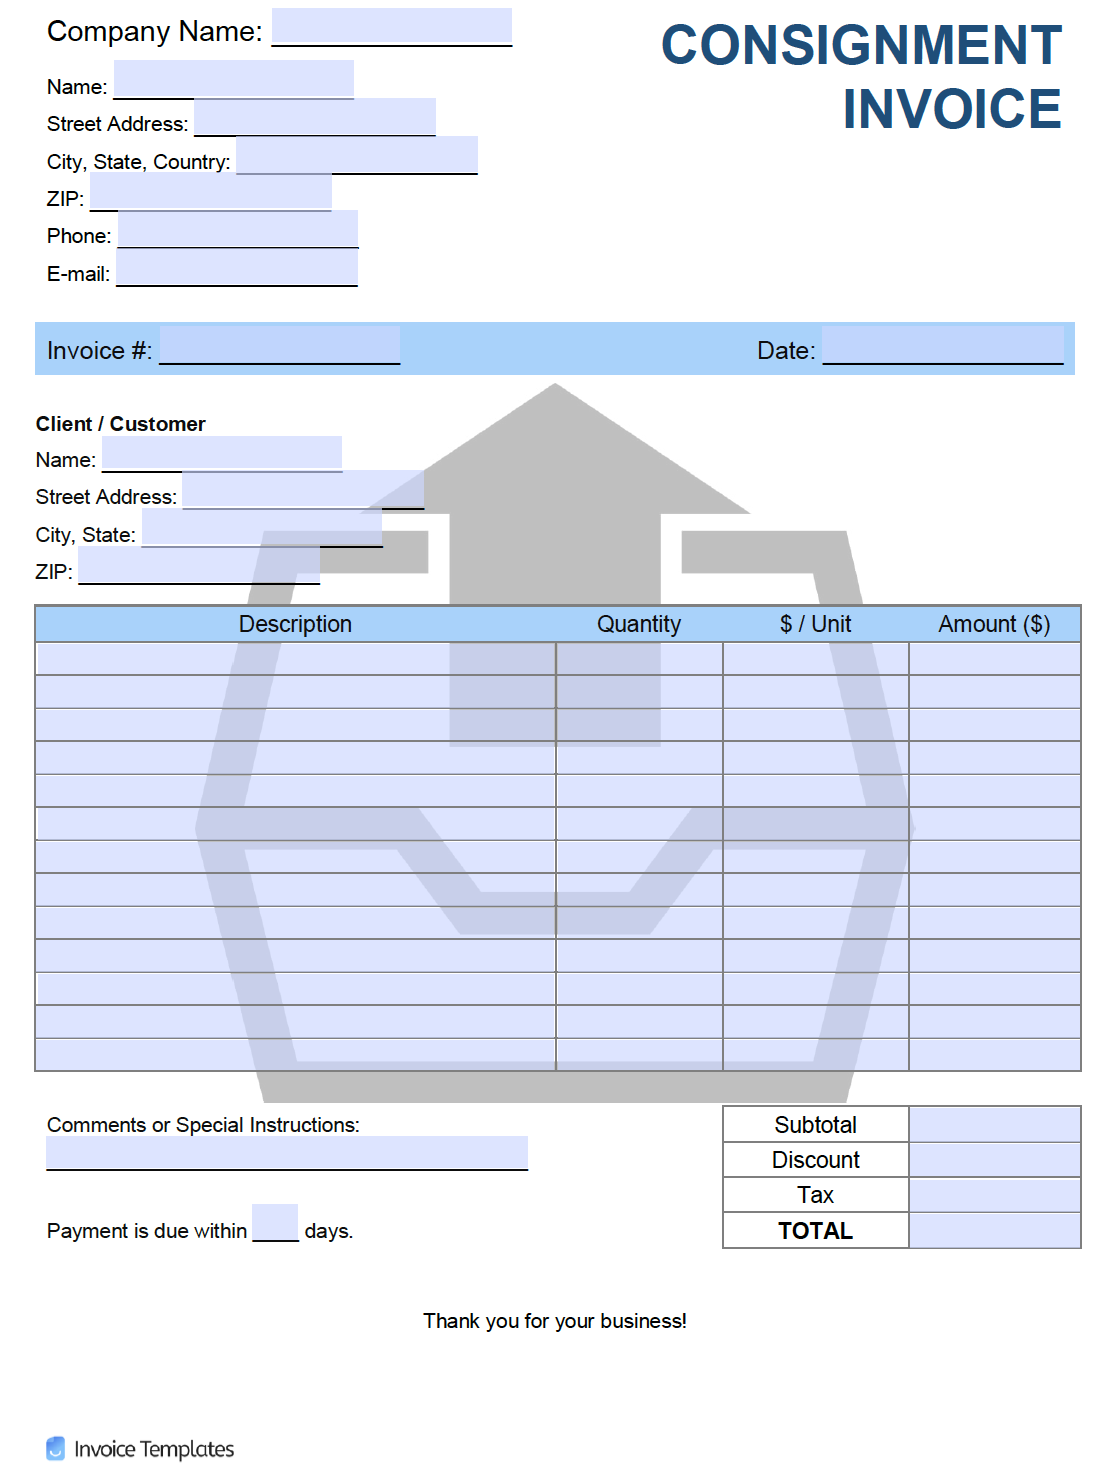 Free Consignment Invoice Template Pdf Word Excel